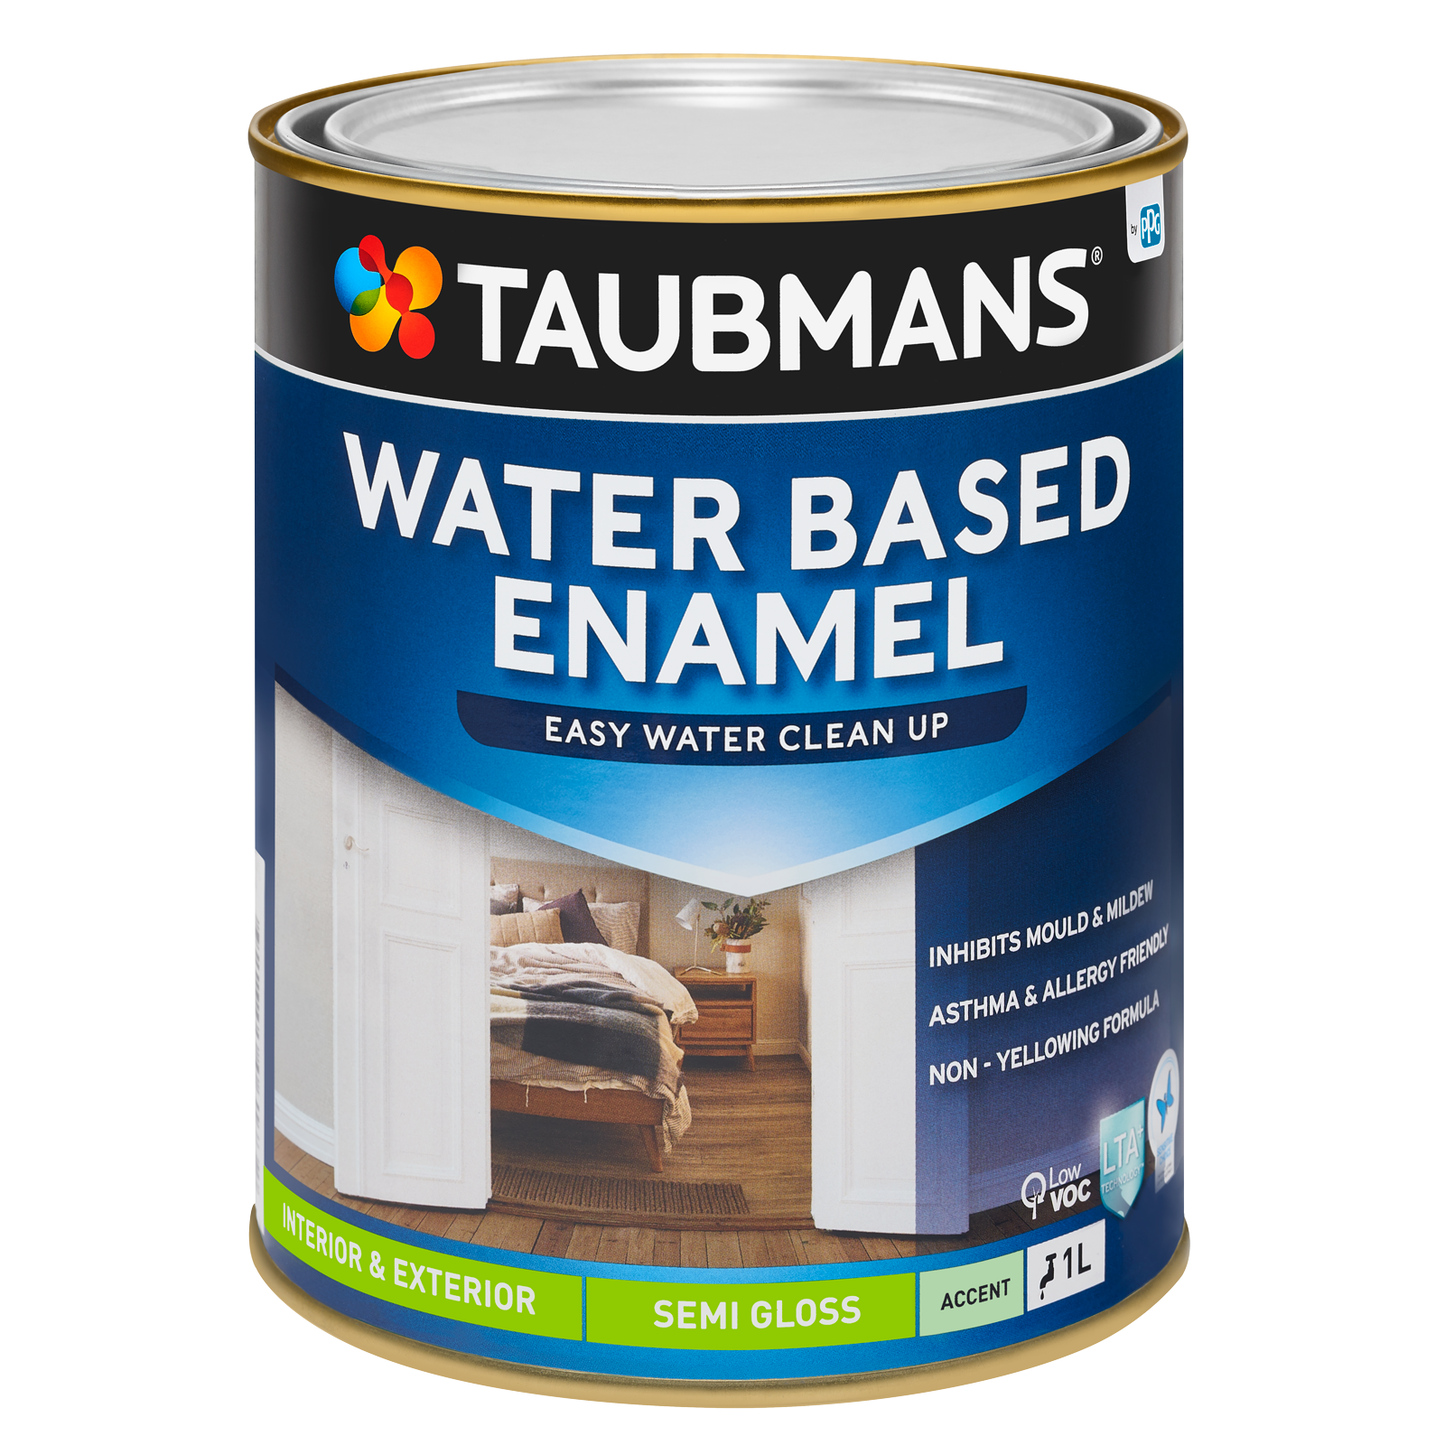 Taubmans Water Based Enamel Paint 1L- Accent Semi Gloss